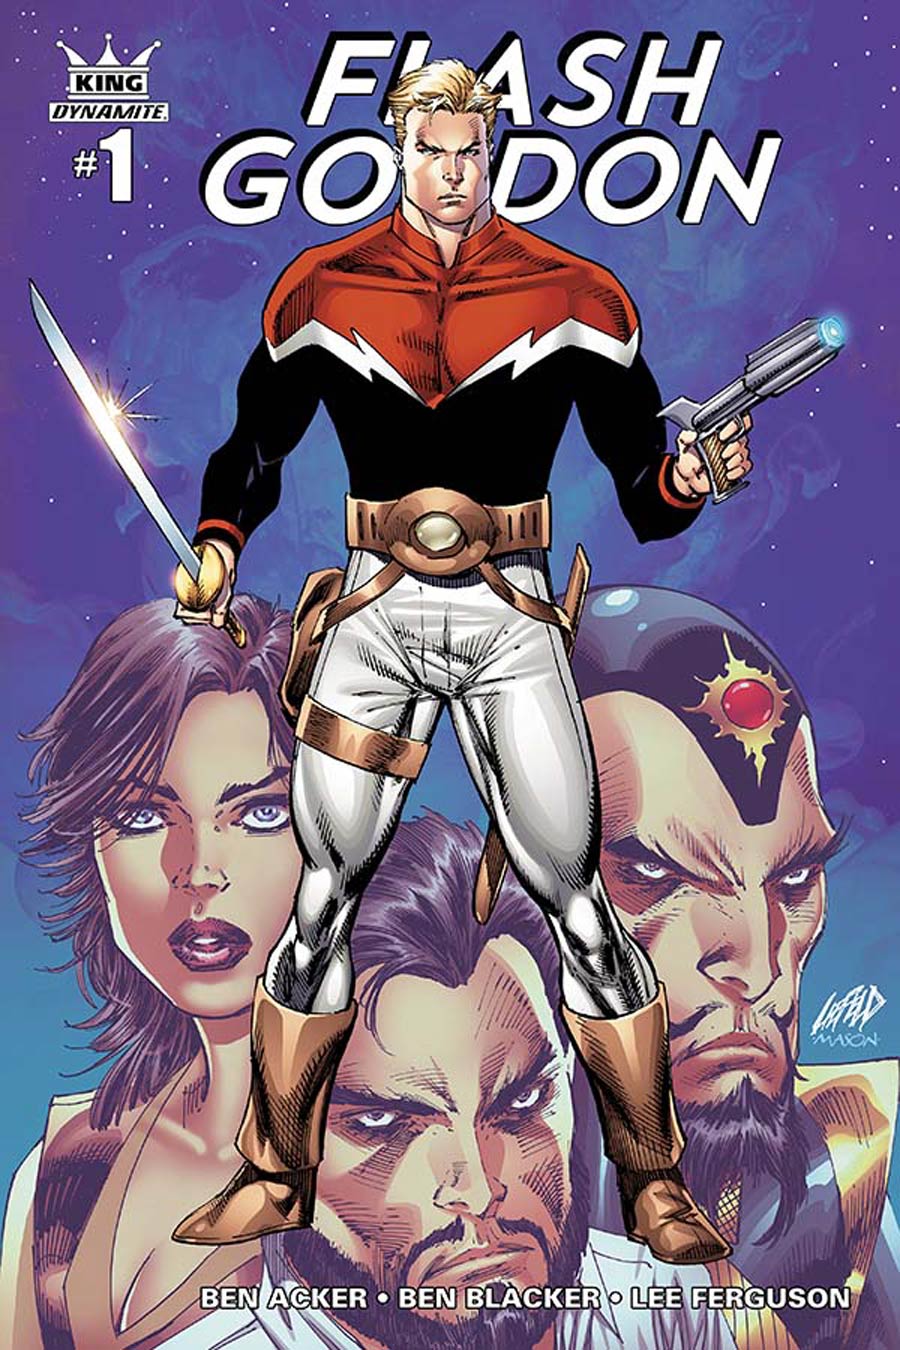 King Flash Gordon #1 Cover C Incentive Rob Liefeld Color Variant Cover